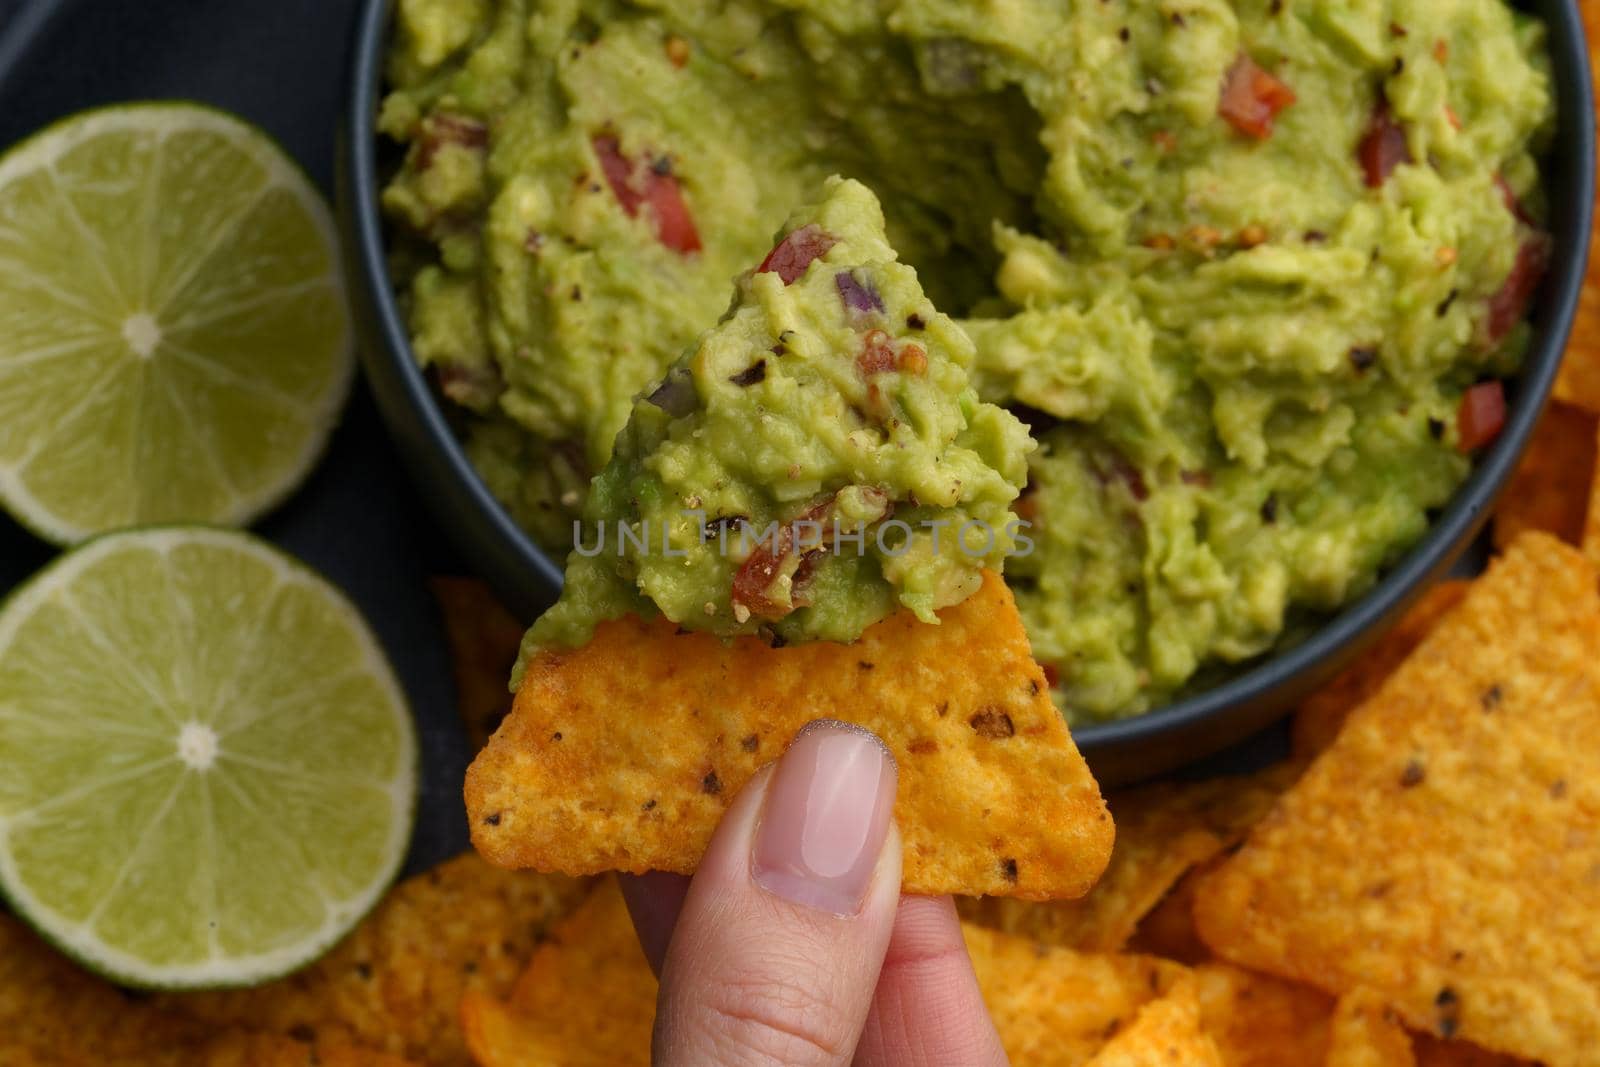 Top view of hand with tasty tortilla chips or nachos homemadewith fresh homemade guacamole dip sauce. High quality photo